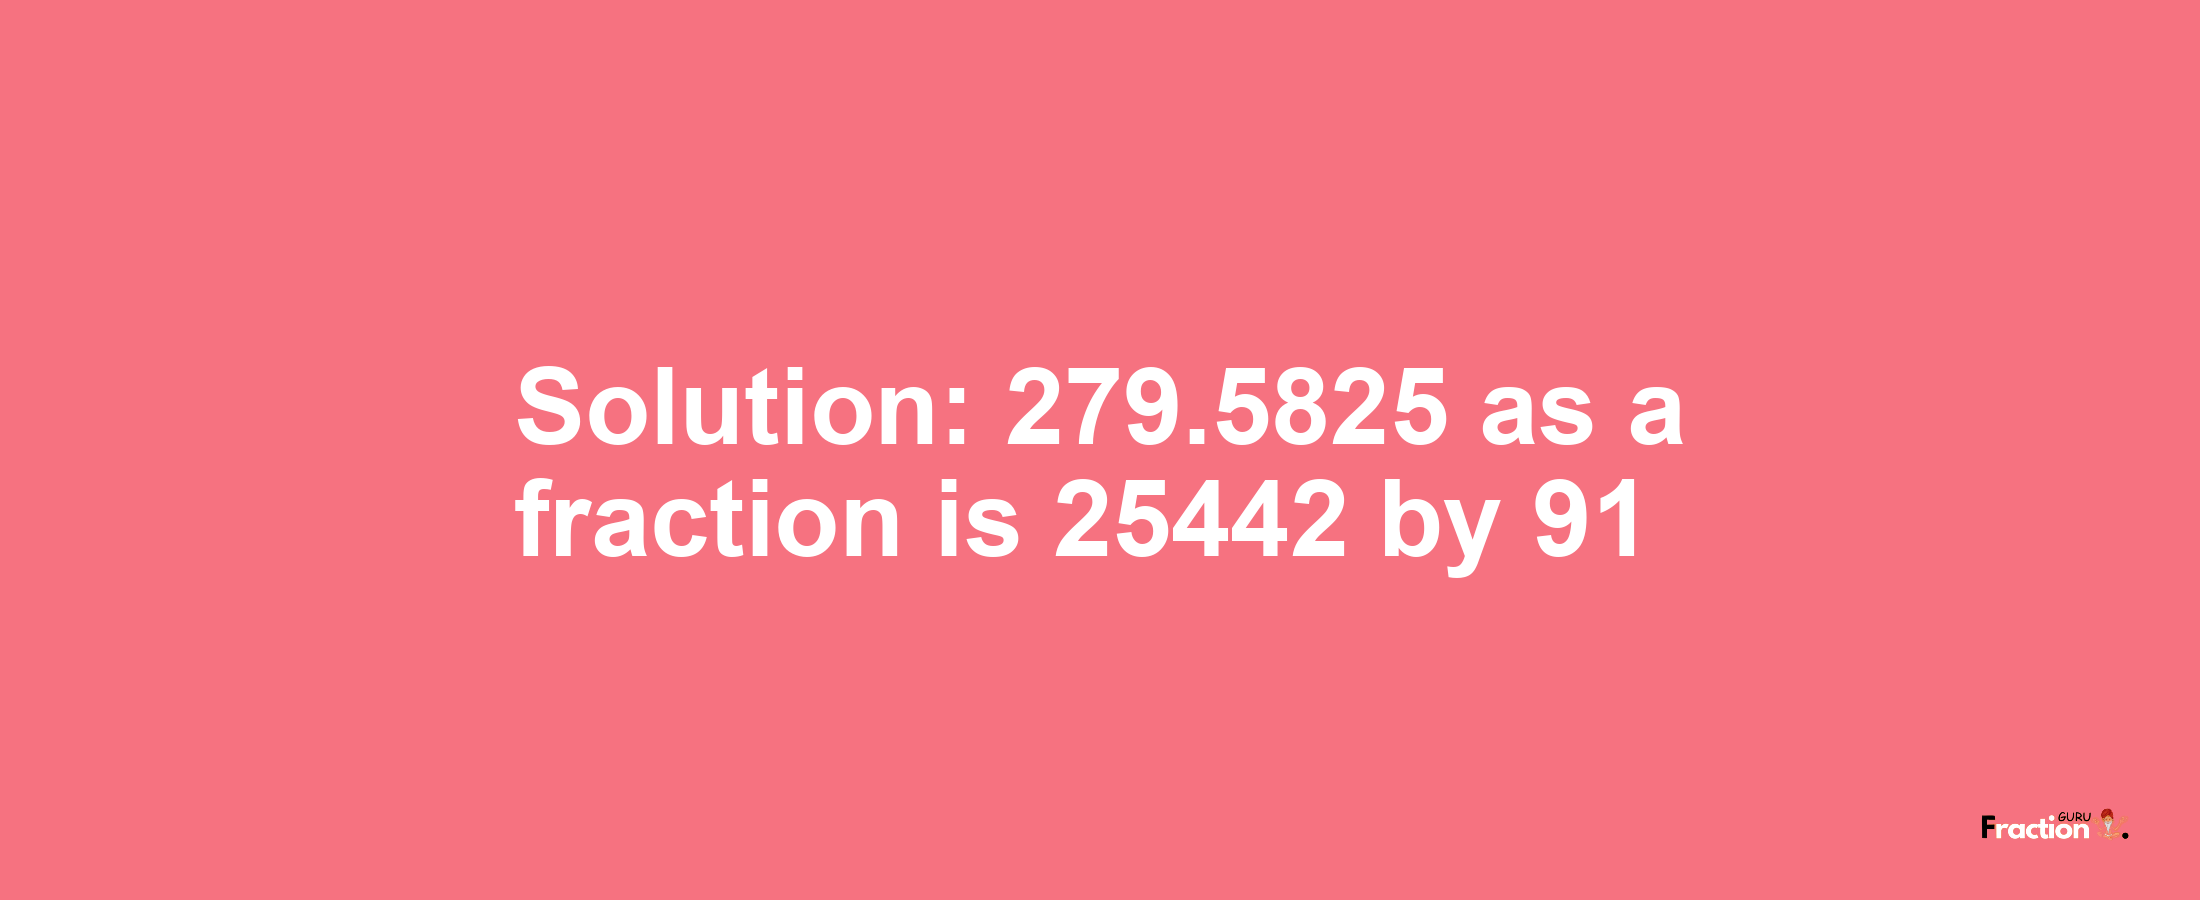 Solution:279.5825 as a fraction is 25442/91